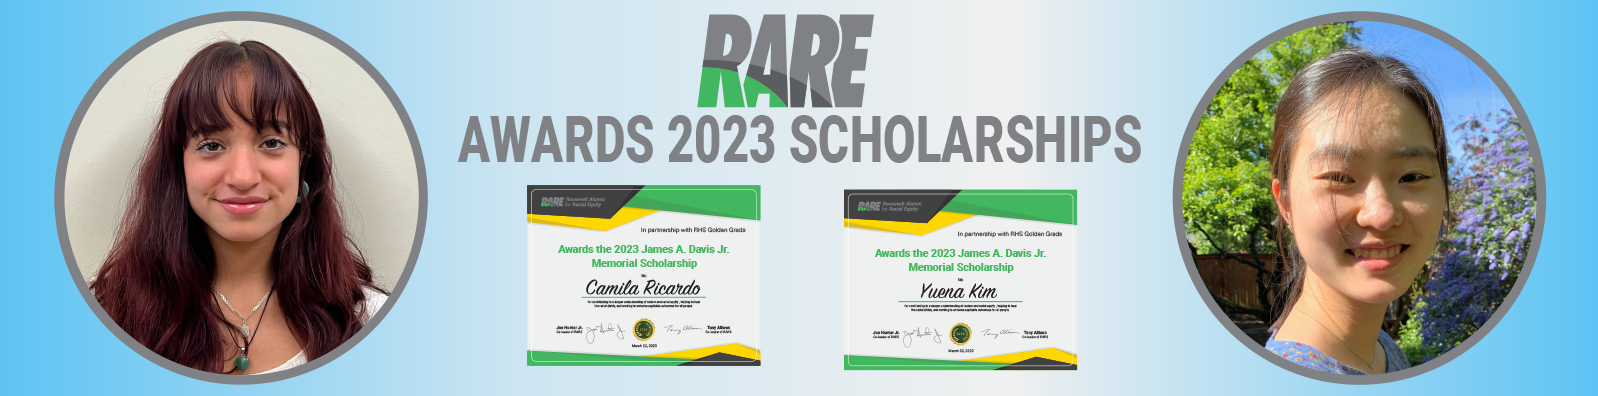 Roosevelt Alumni For Racial Equity (RARE) Newsletter May 2023